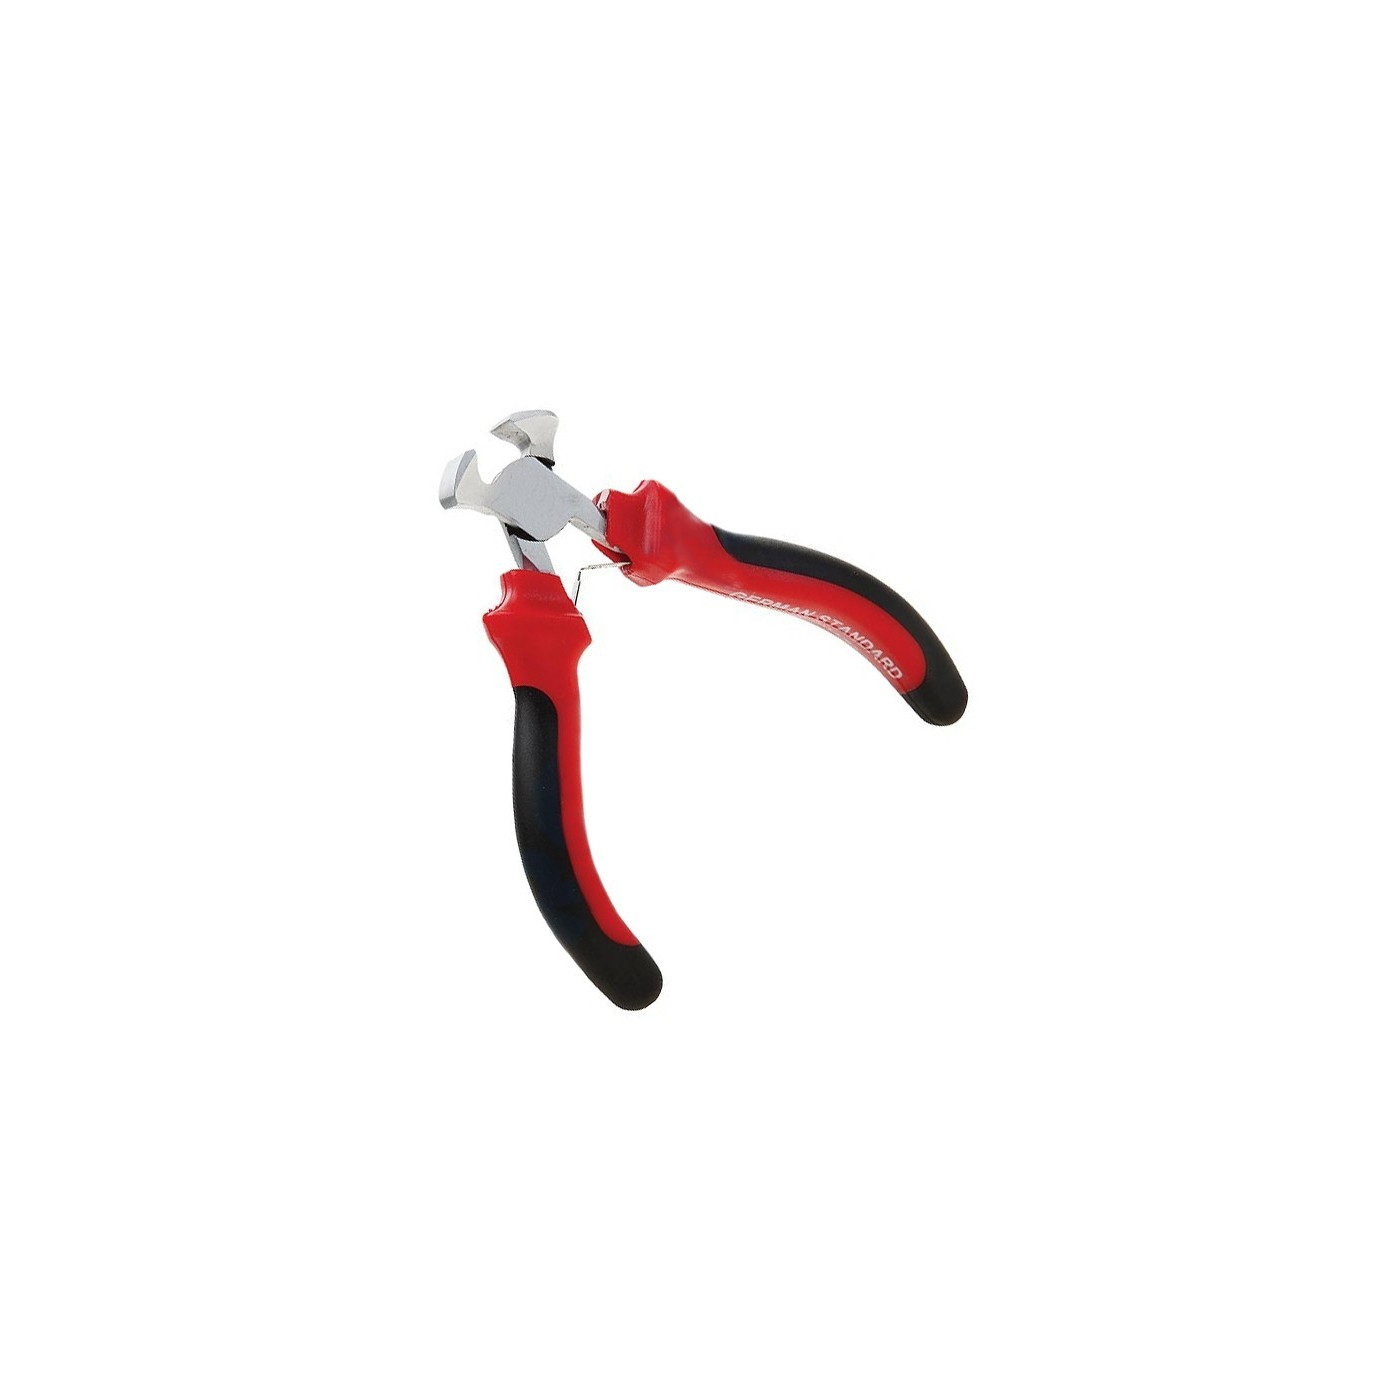 End cutting pliers small (110 mm)